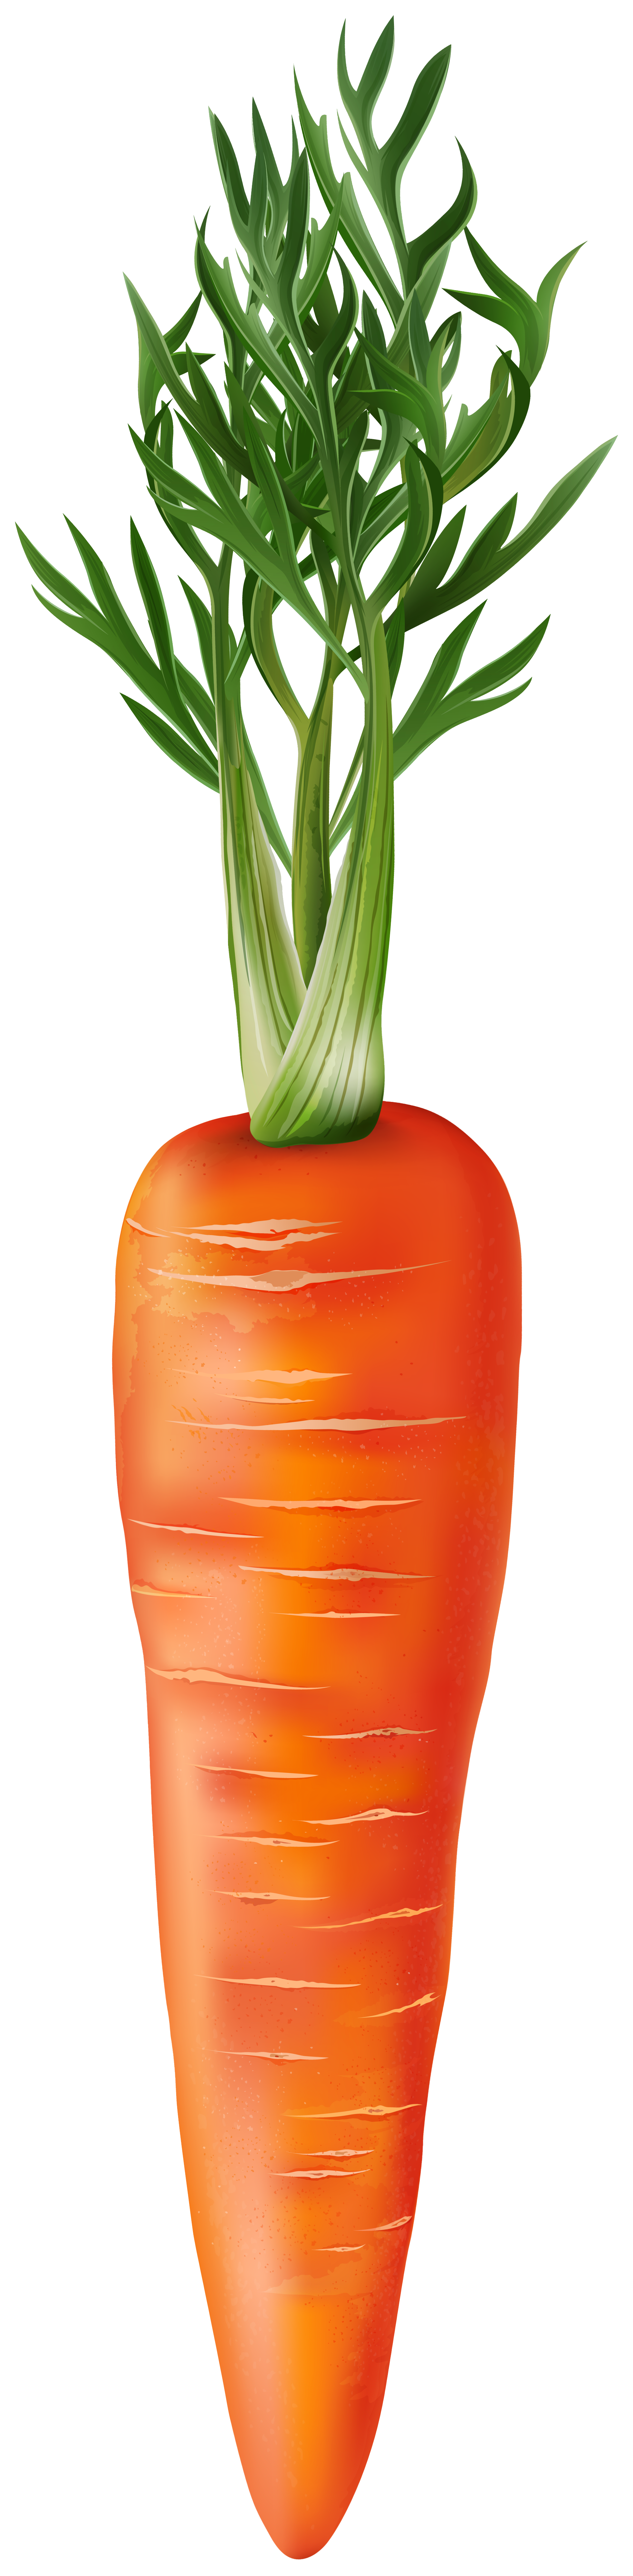 Vegetable png images